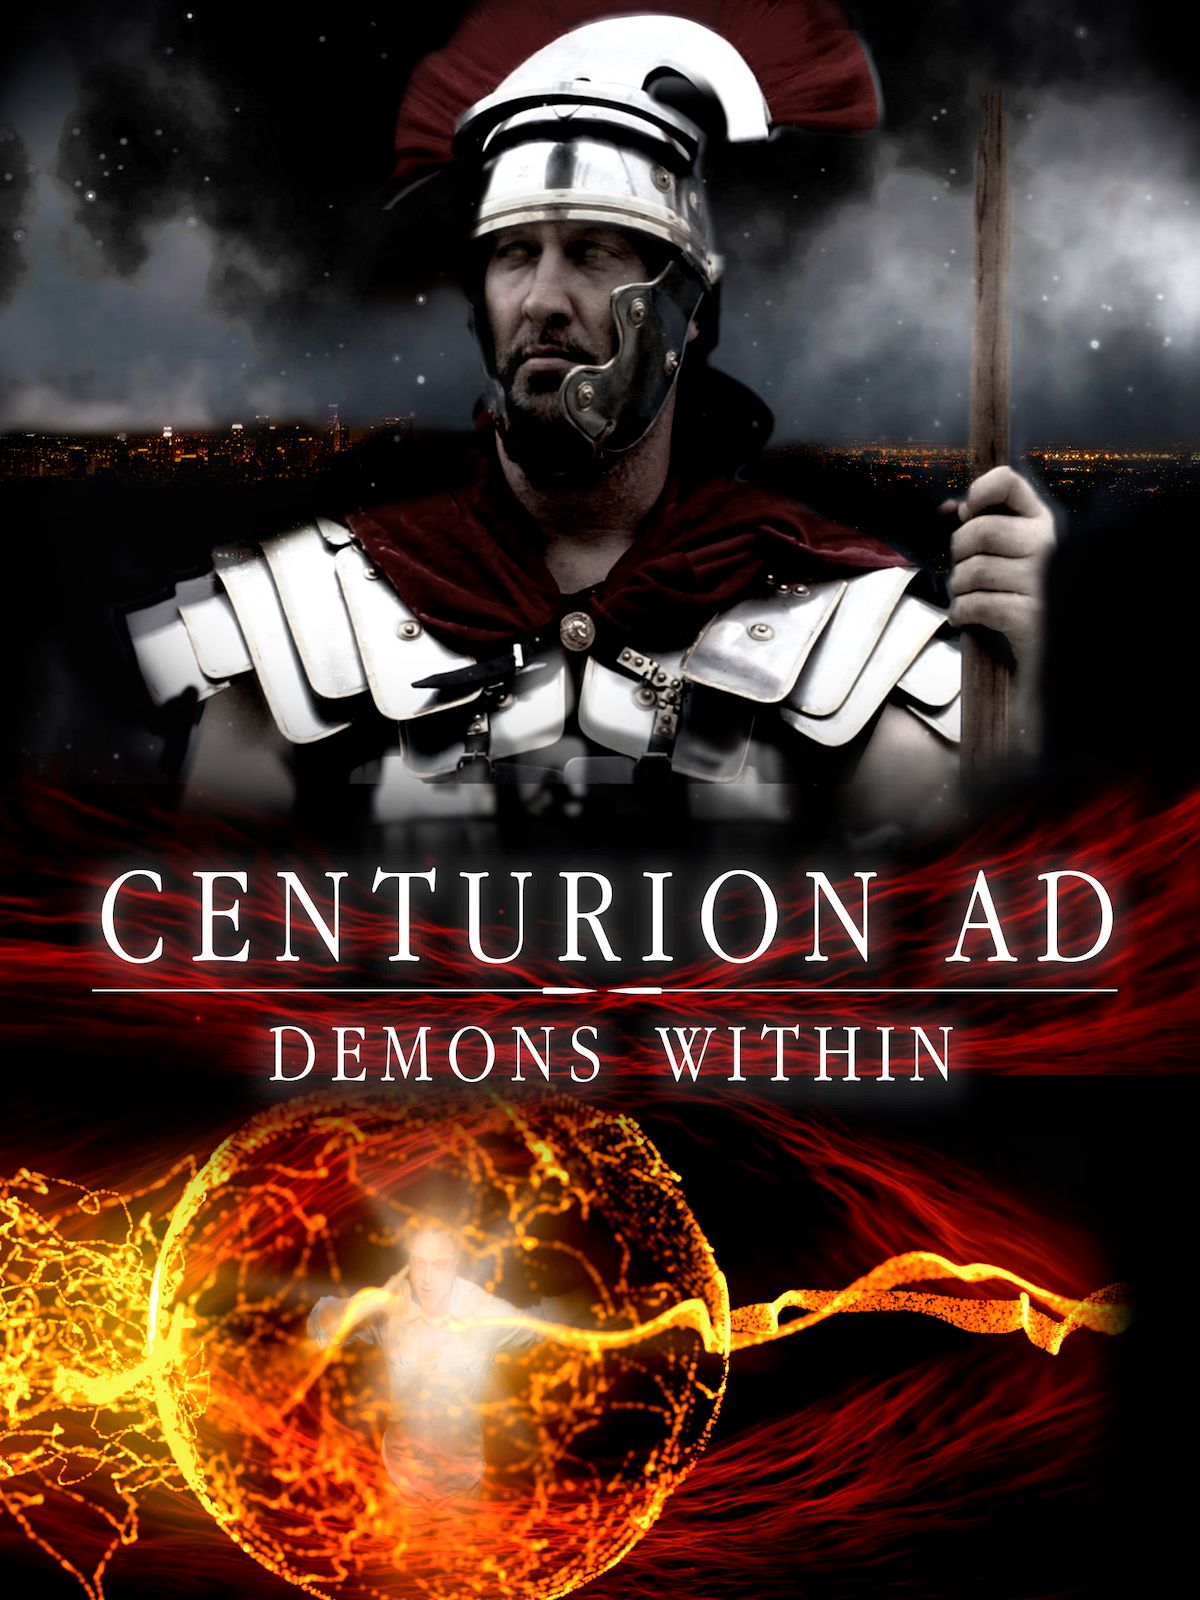 Centurion A.D.: Demons Within